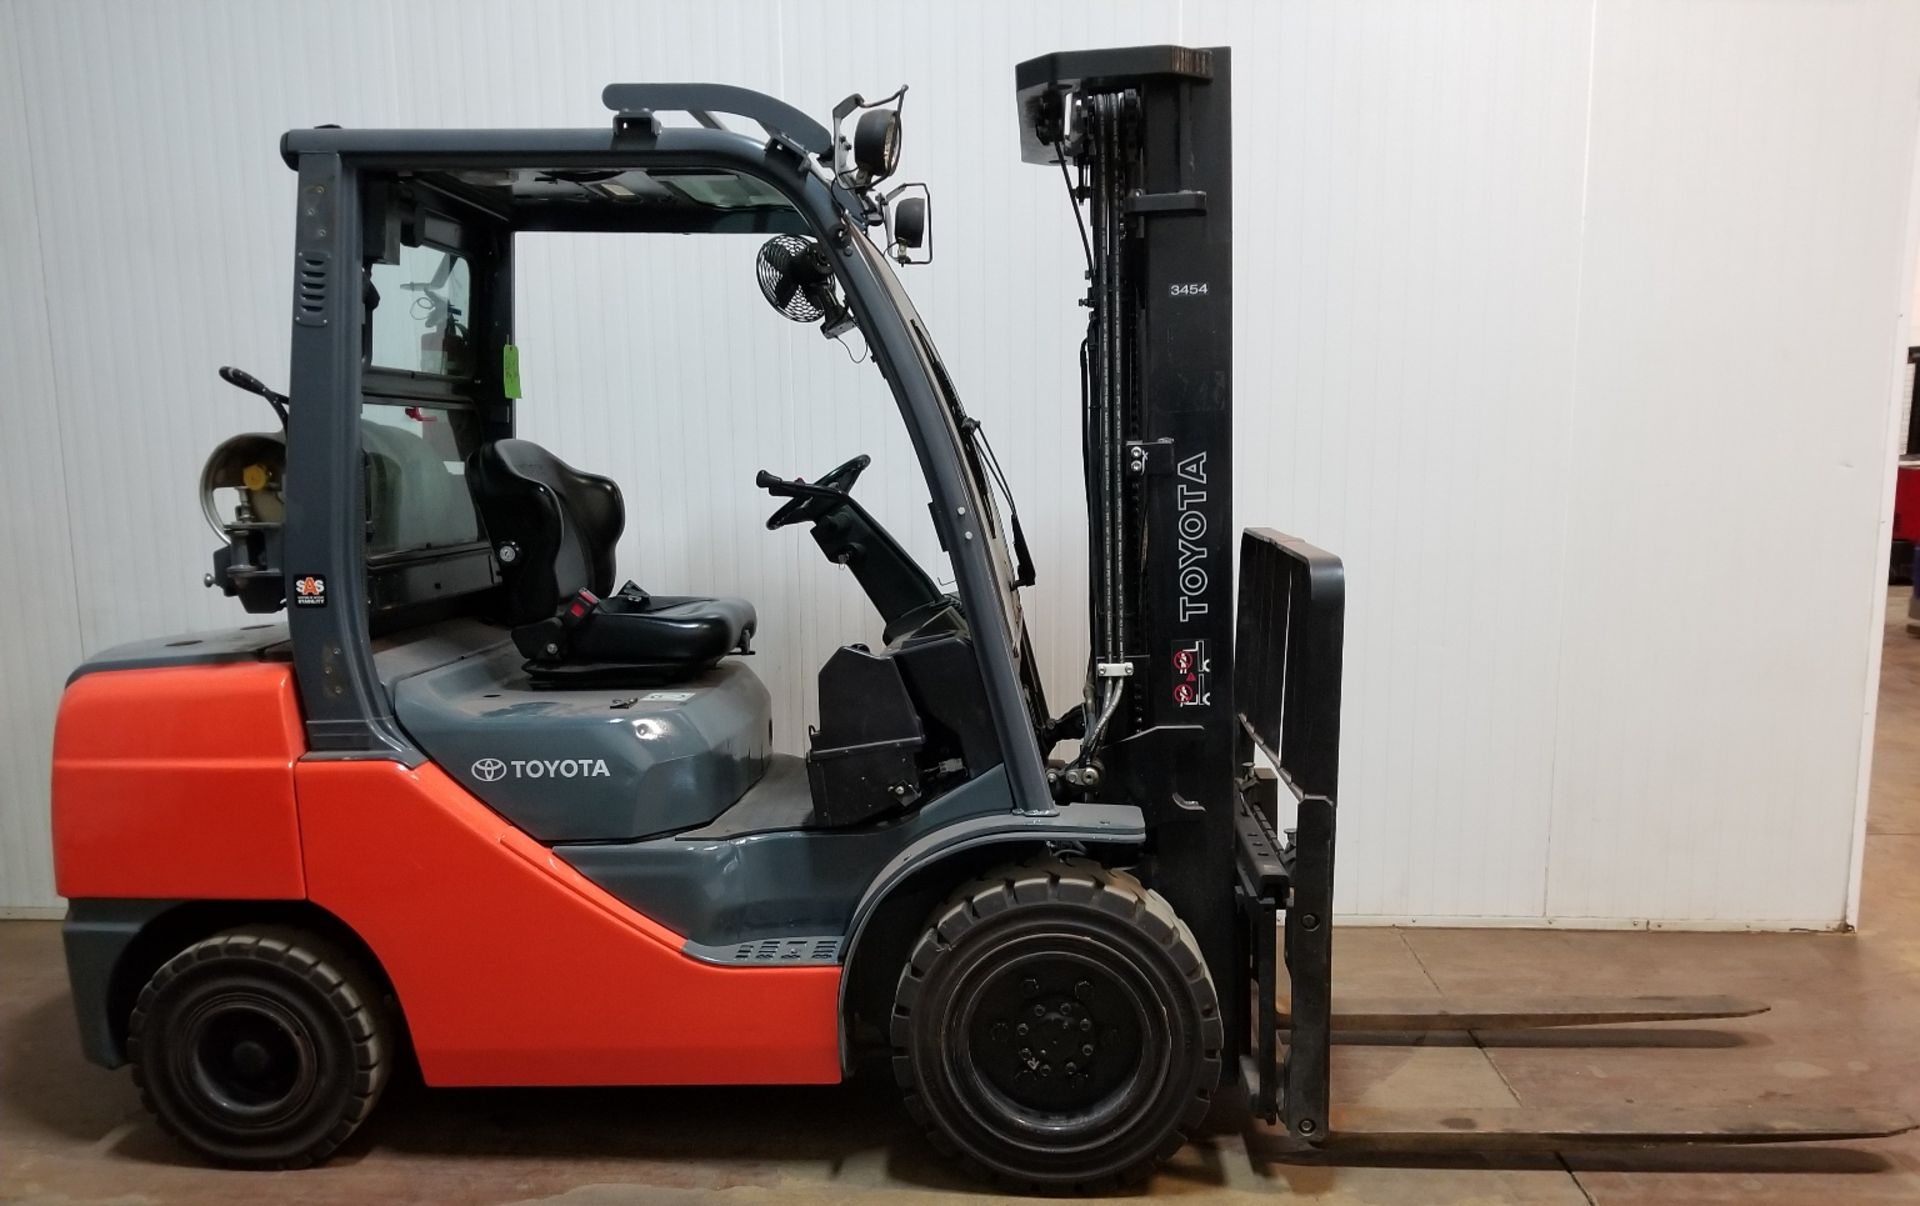 TOYOTA (2013) 8FGU32 6,500 LB. CAPACITY LPG FORKLIFT WITH 187" MAX. LIFT HEIGHT, 3-STAGE MAST,